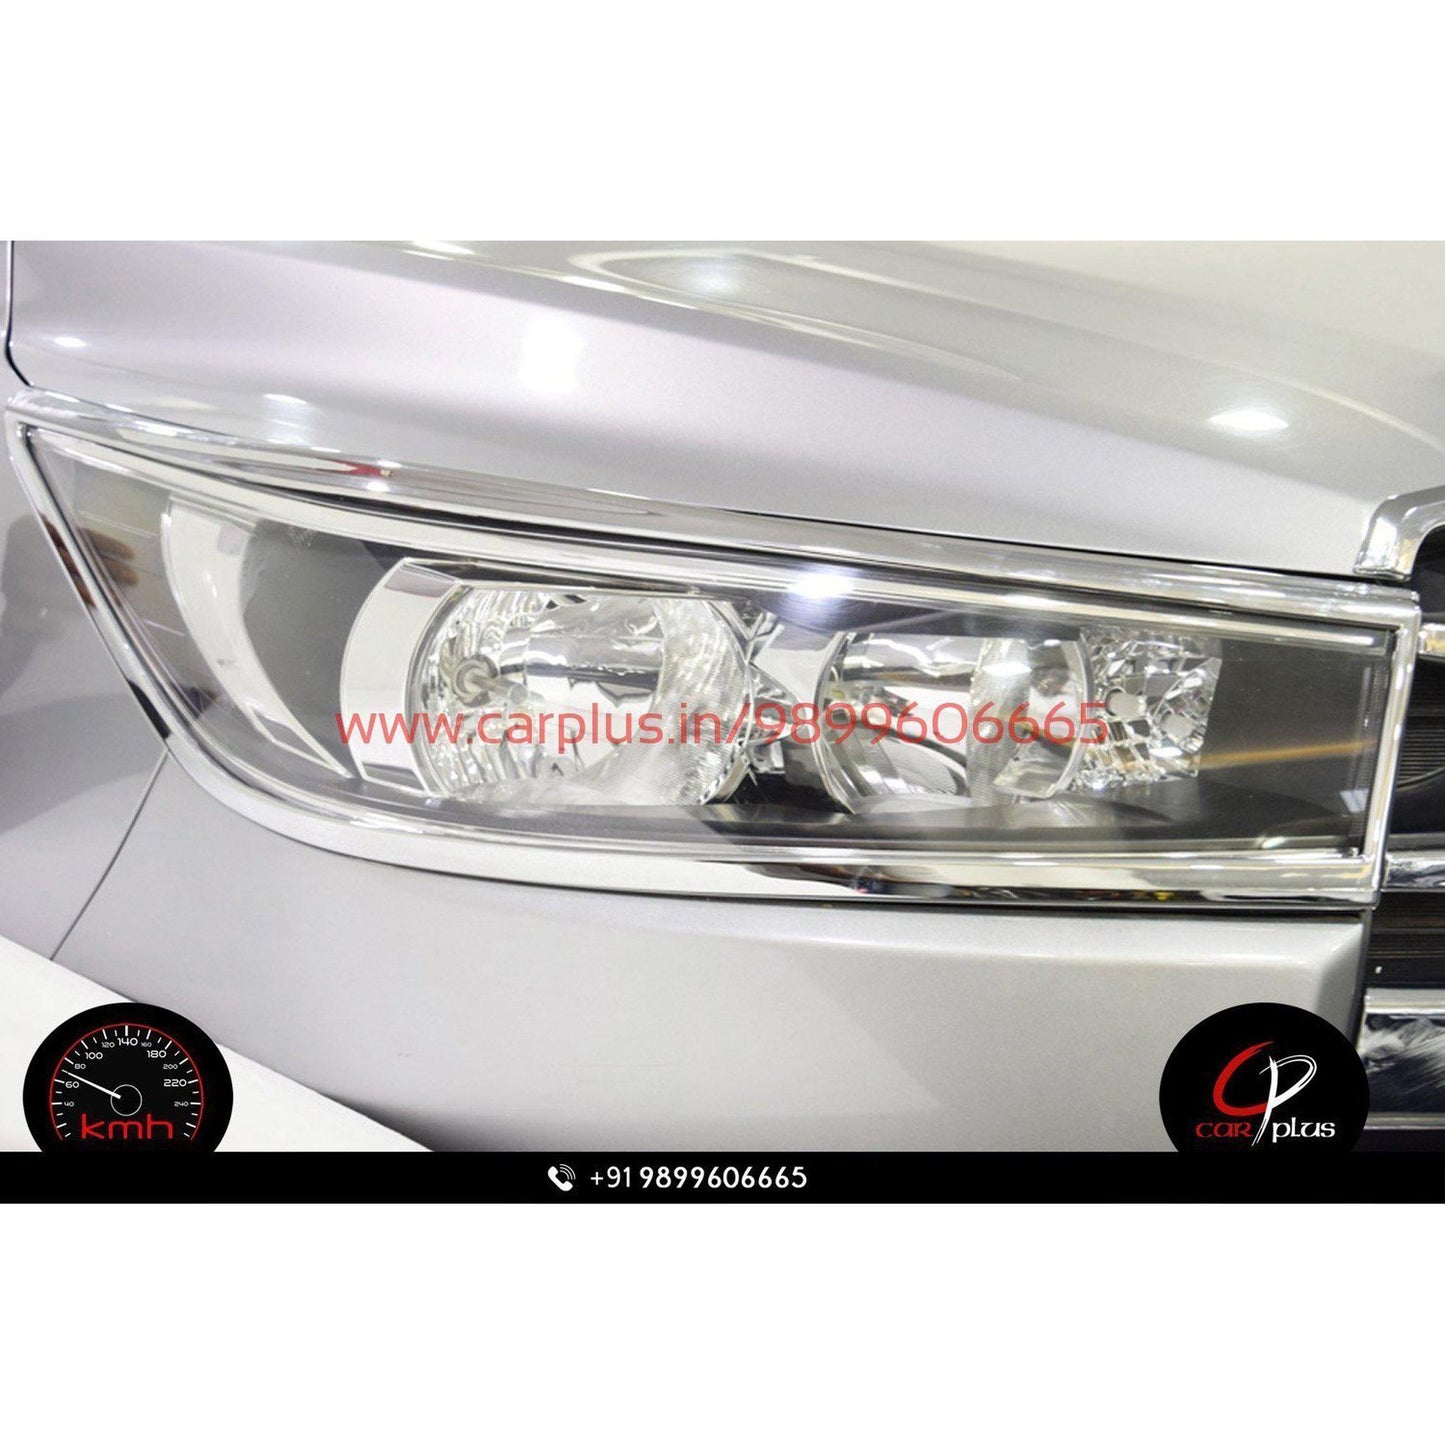 Buy Toyota Innova Chrome HeadLight Covers online at low prices-Rideofrenzy